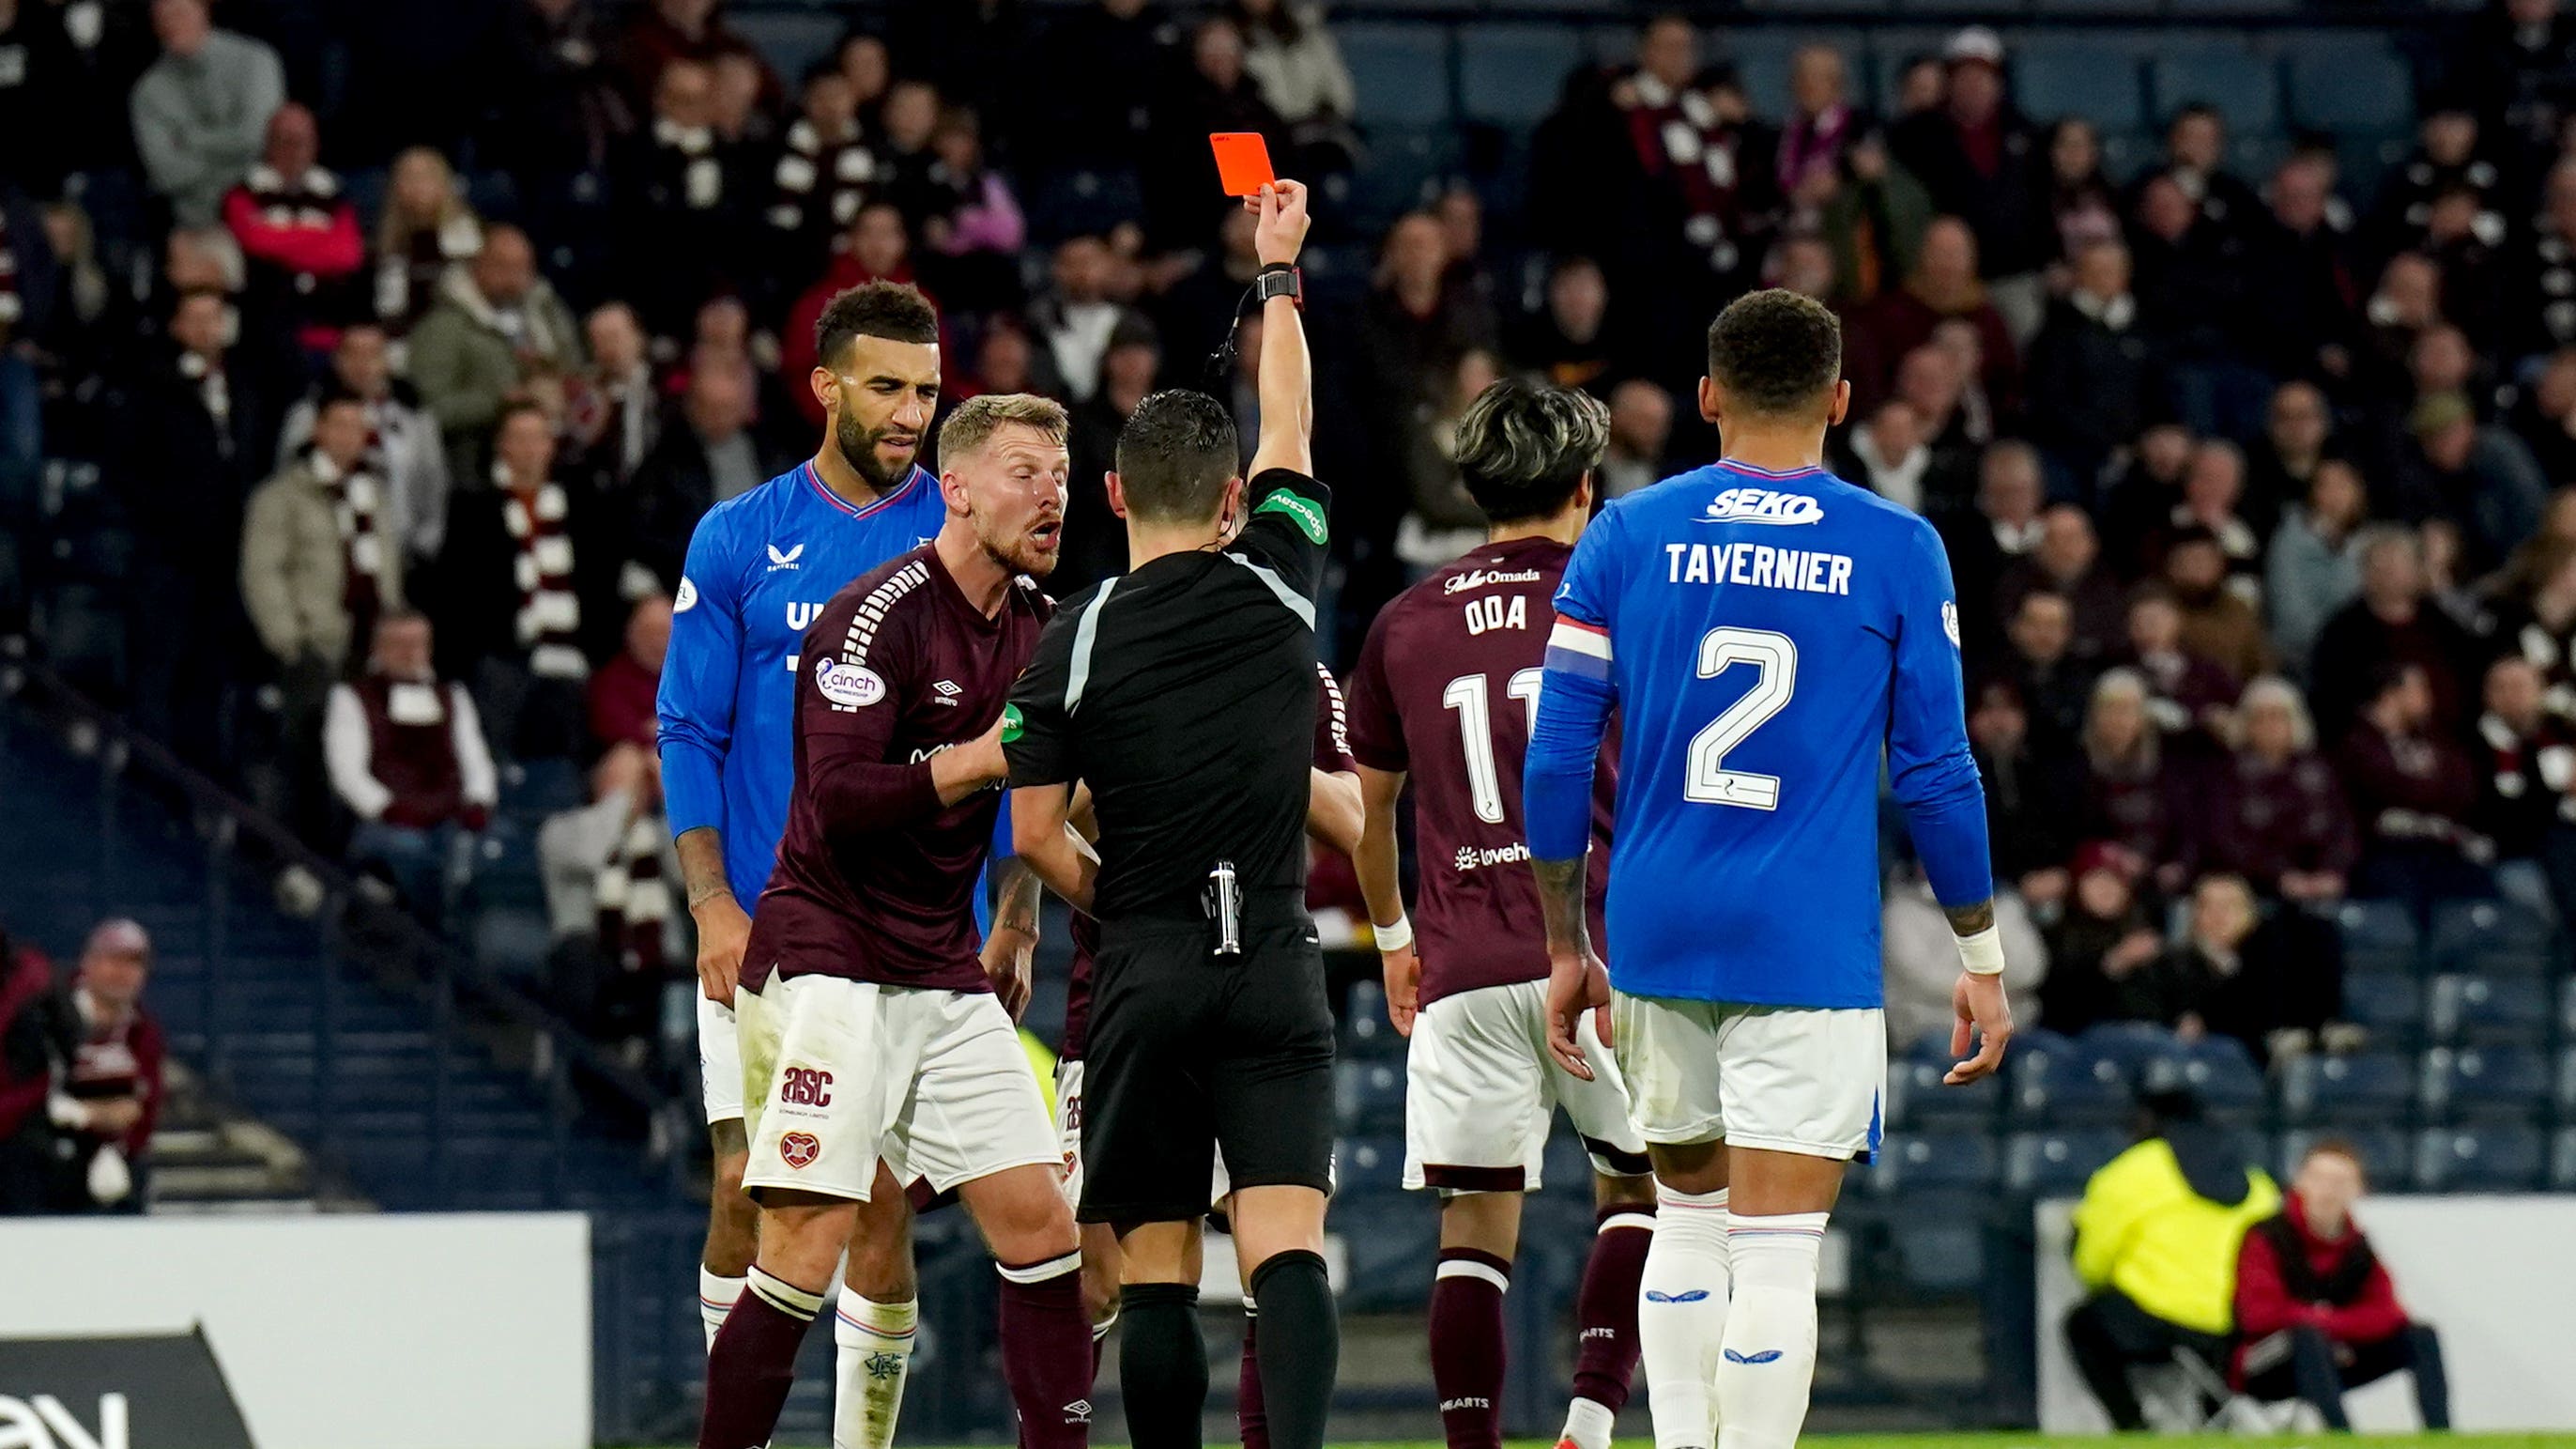 Stephen Kingsley was confident VAR would save him from red card against Rangers